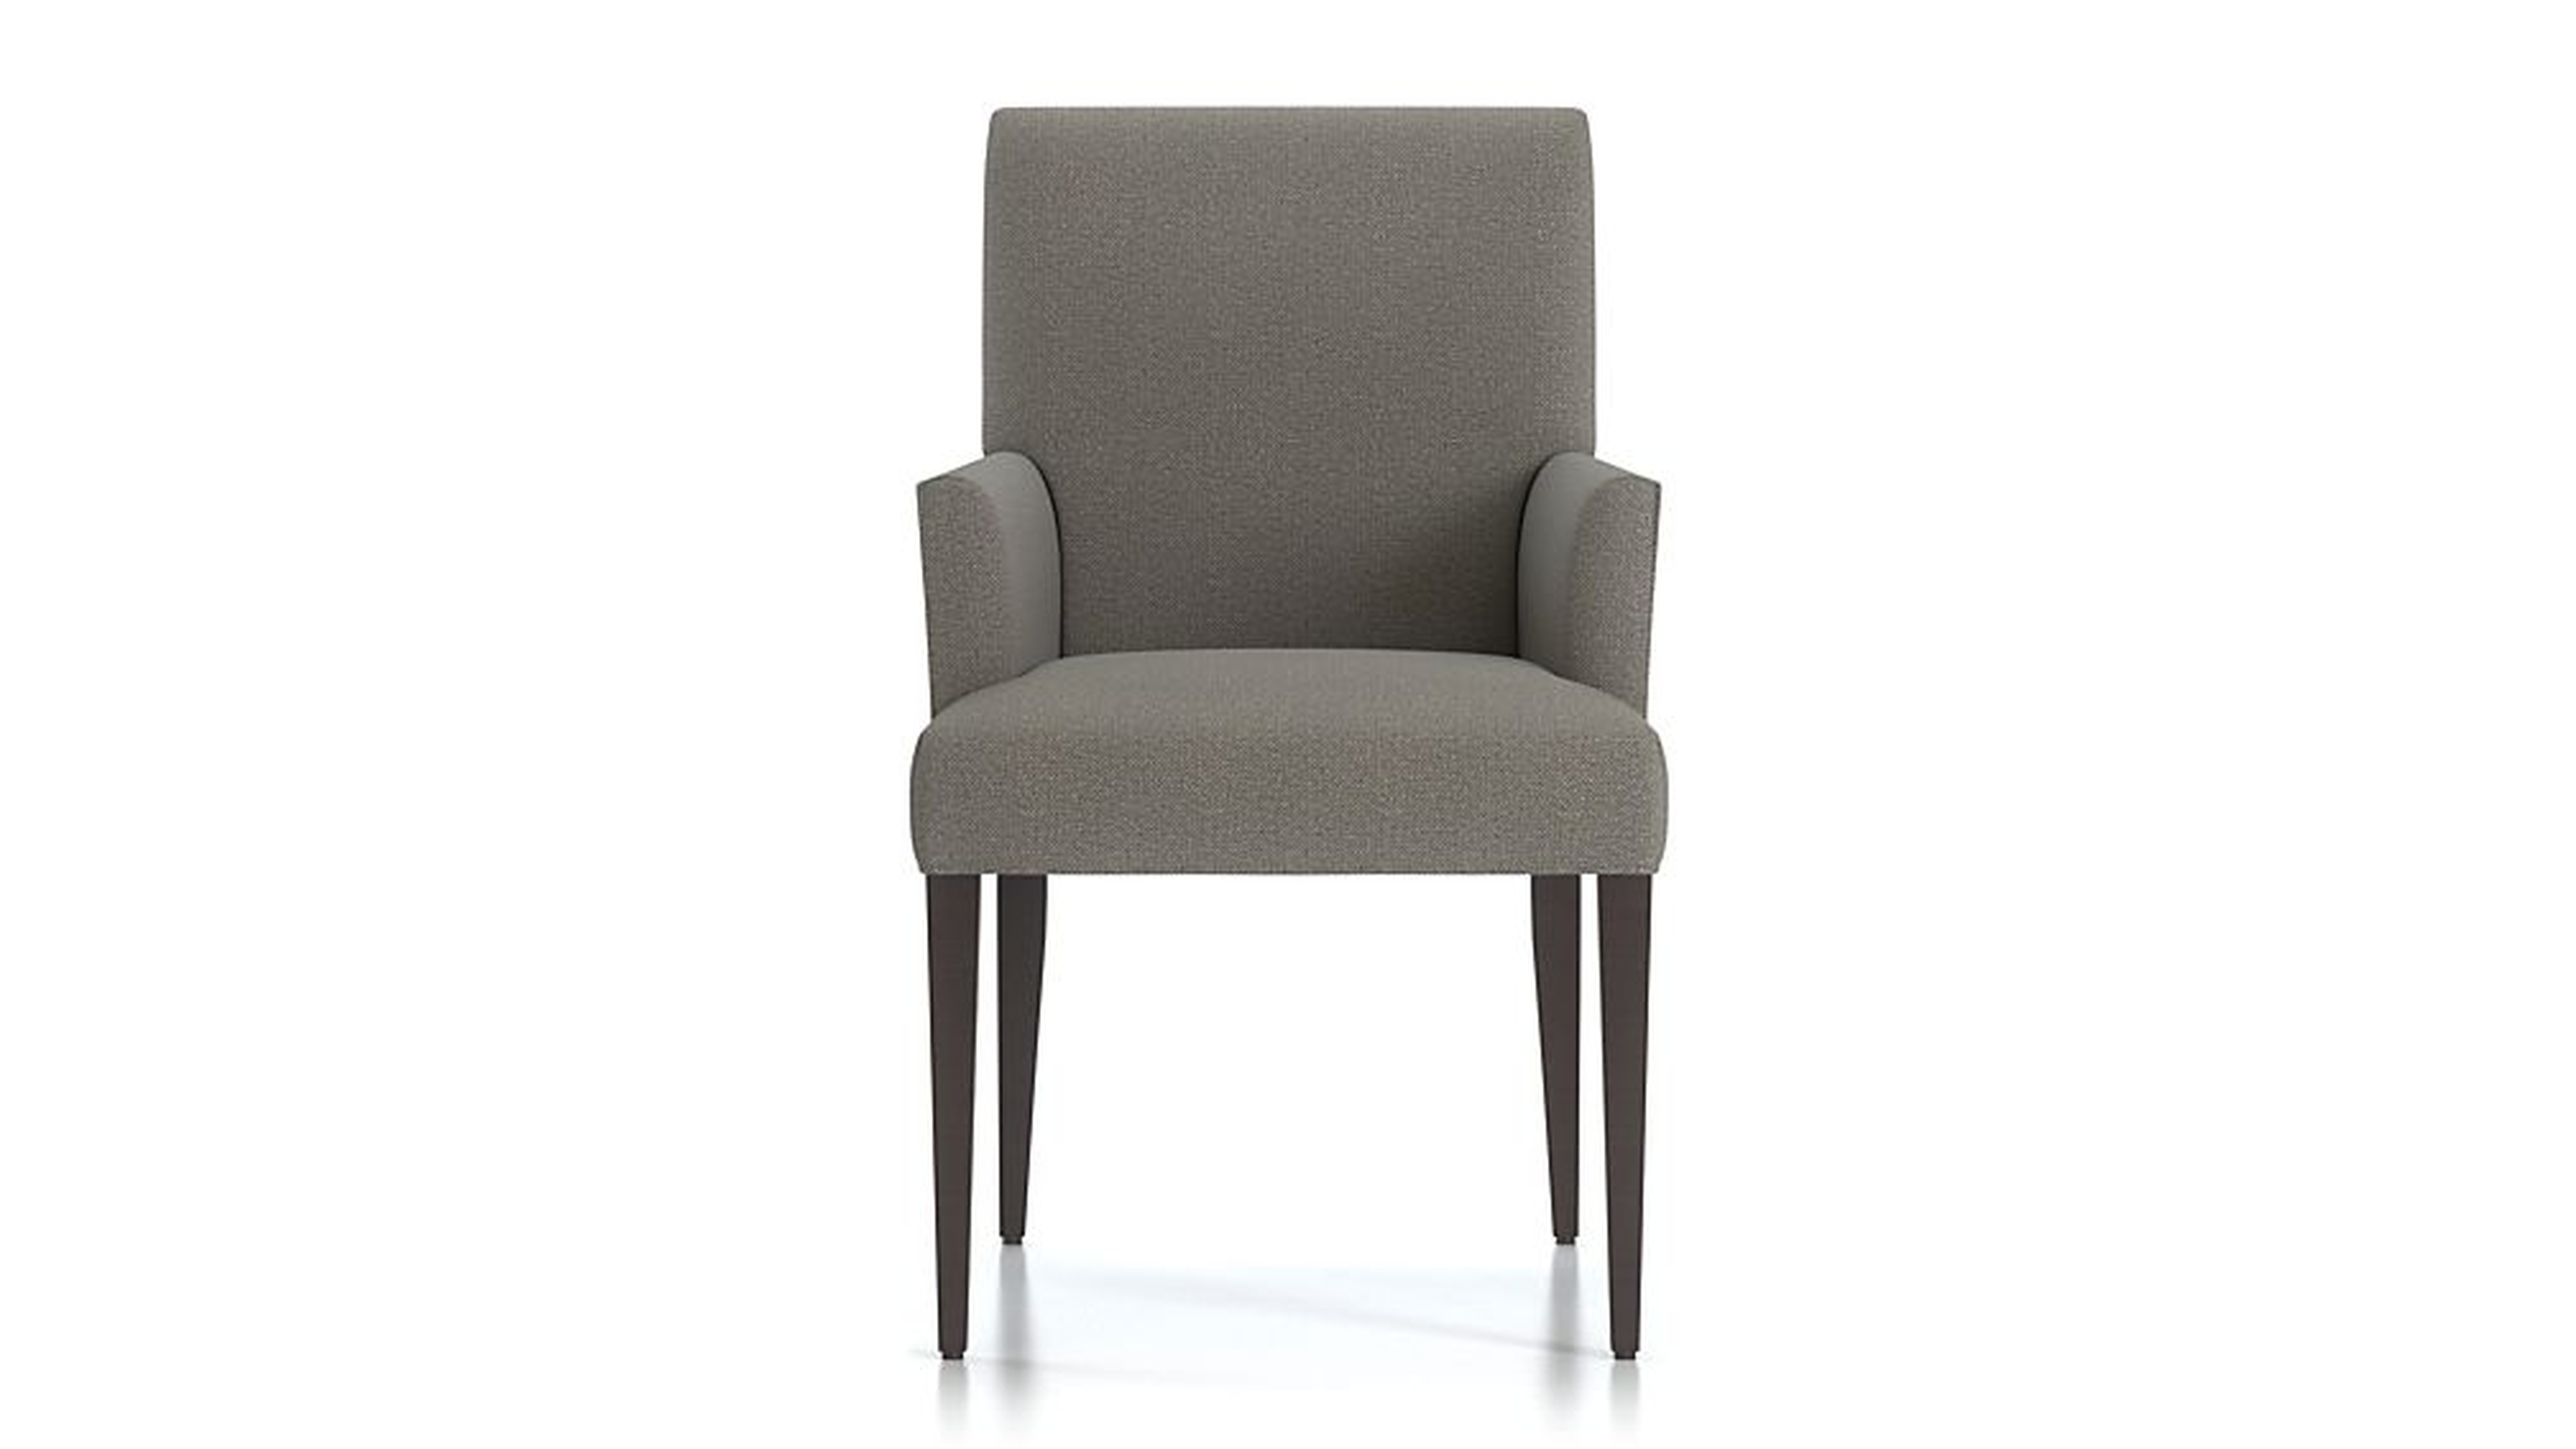 Miles Upholstered Dining Arm Chair - Tobias, Gravel - Crate and Barrel